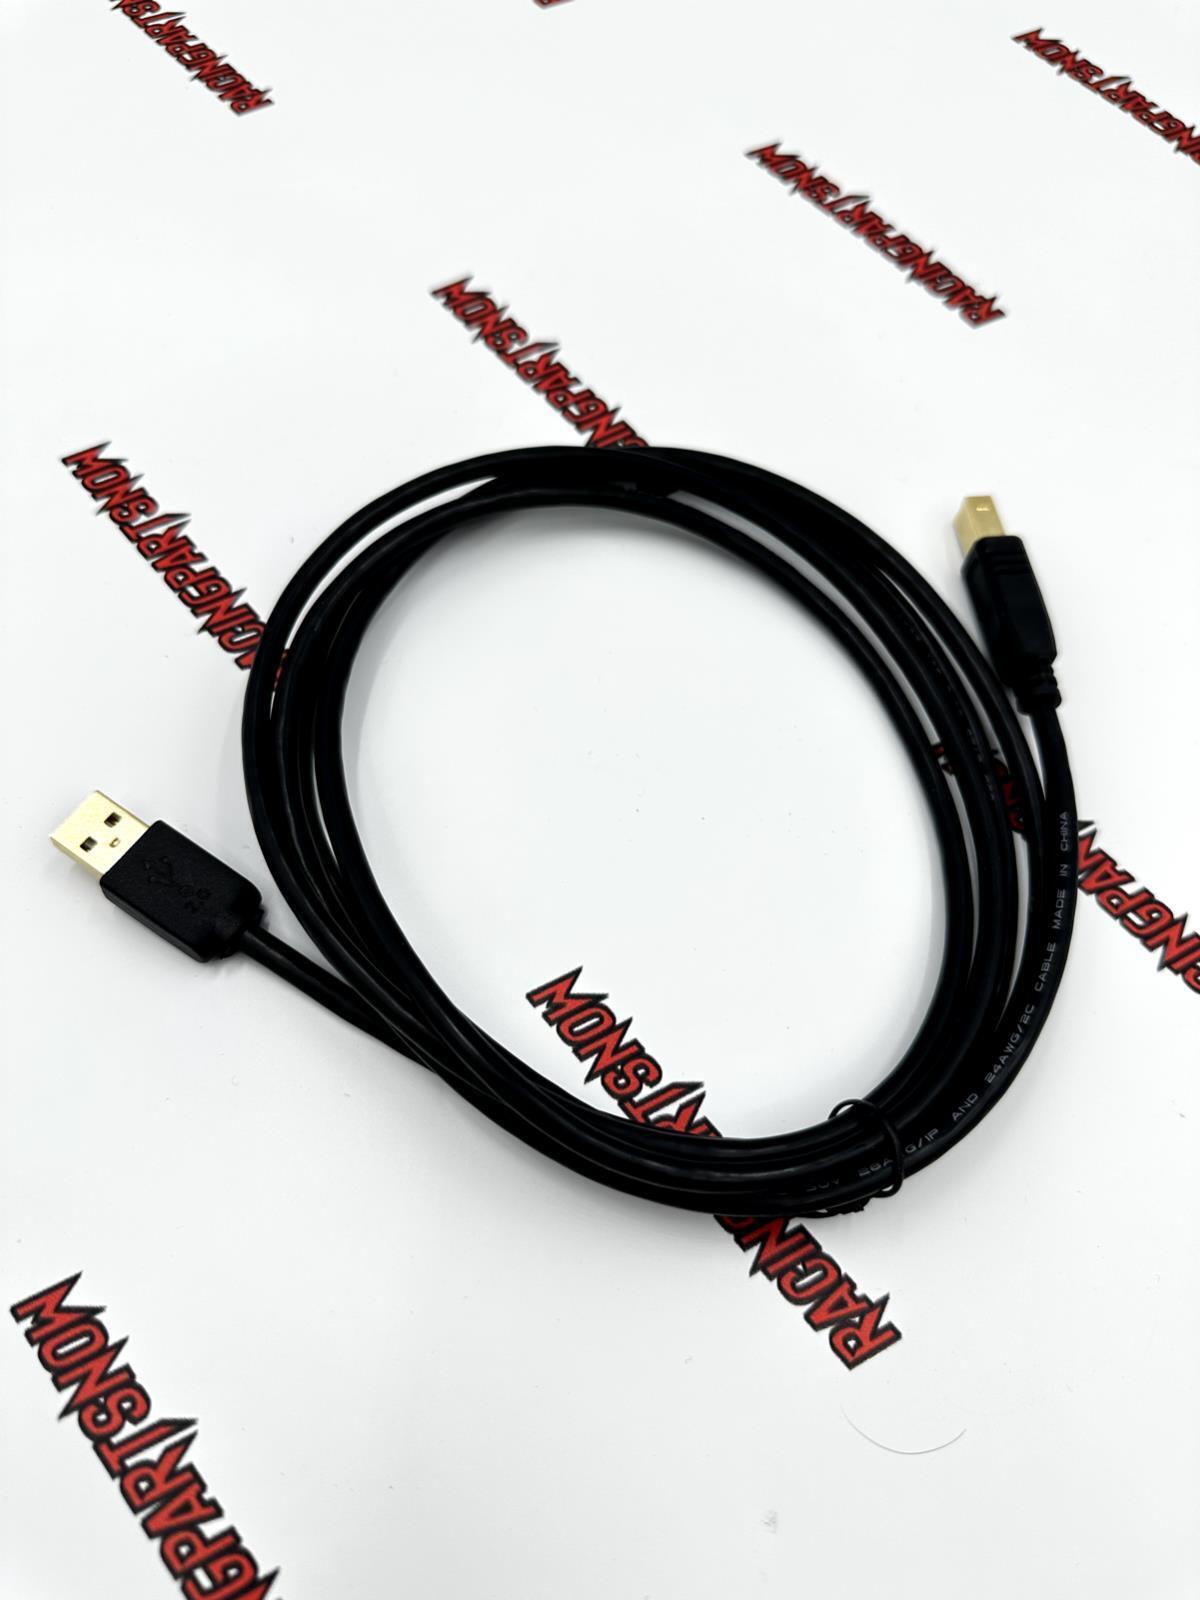 6 FT USB LAPTOP DATA CABLE CORD FOR S300 or KPRO